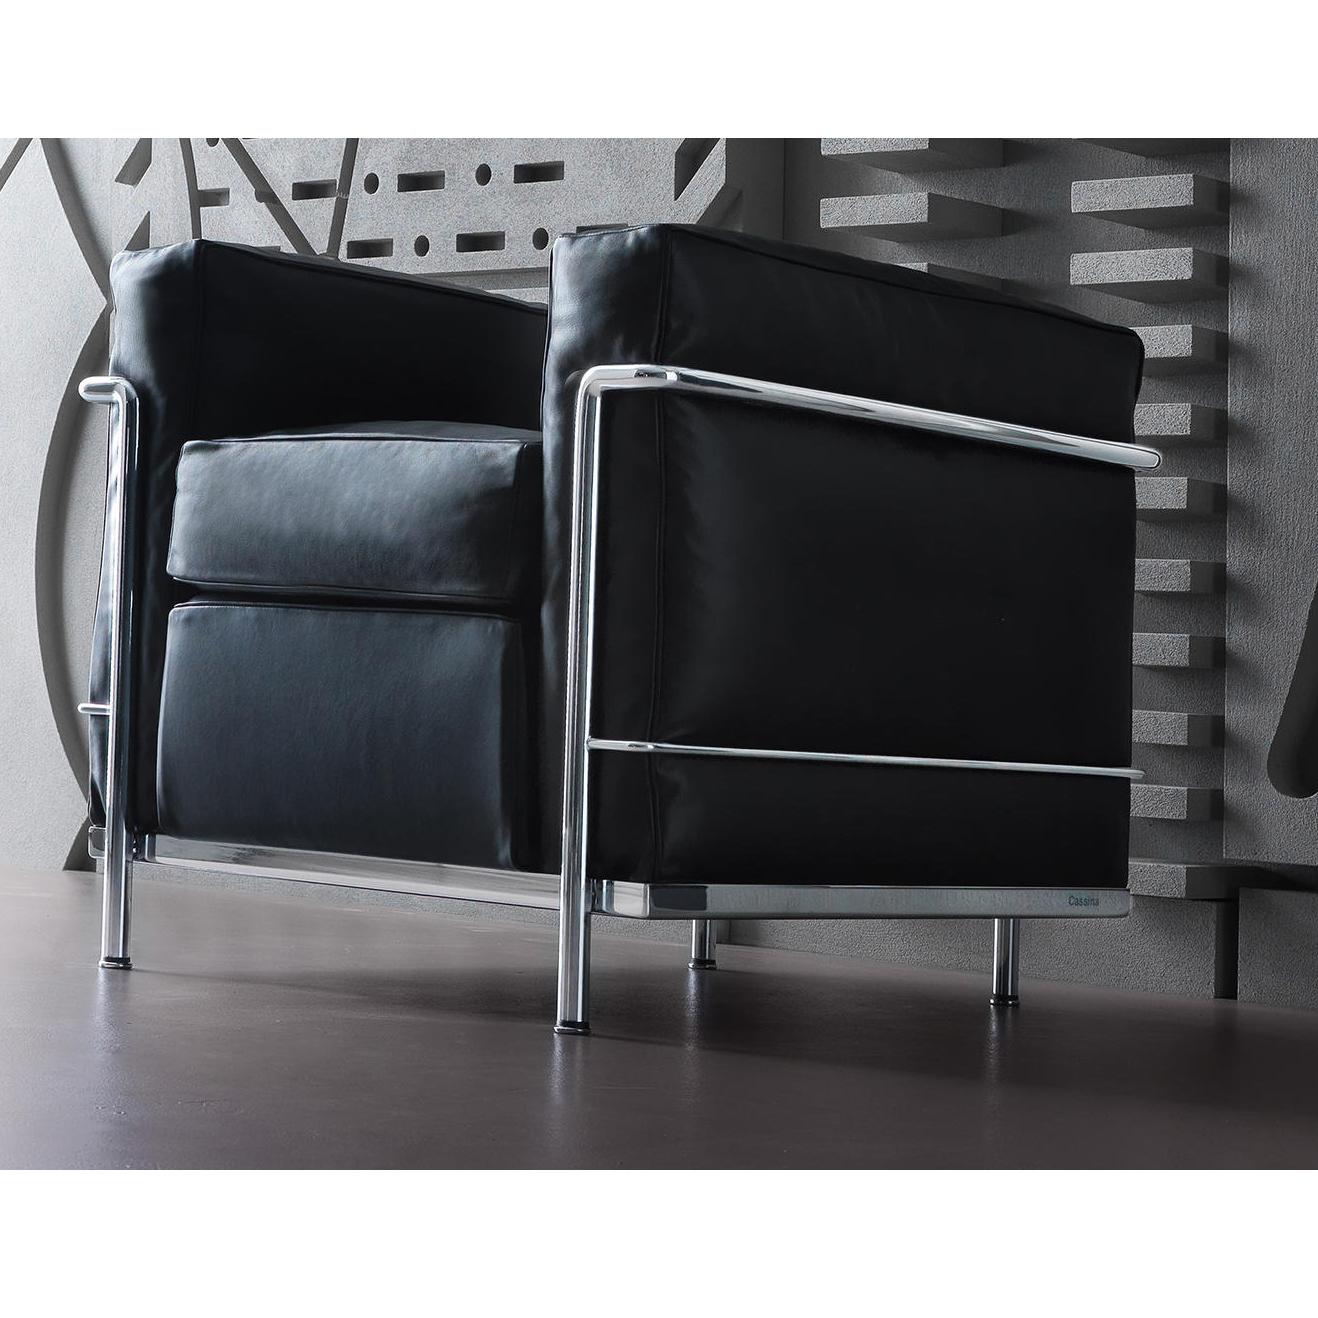 Armchair designed by Le Corbusier, Pierre Jeanneret, Charlotte Perriand in 1928.
Manufactured by Cassina in Italy.

Timeless, unique, and profoundly authentic, the LC2 armchair has played a role in the history of furniture design, becoming a